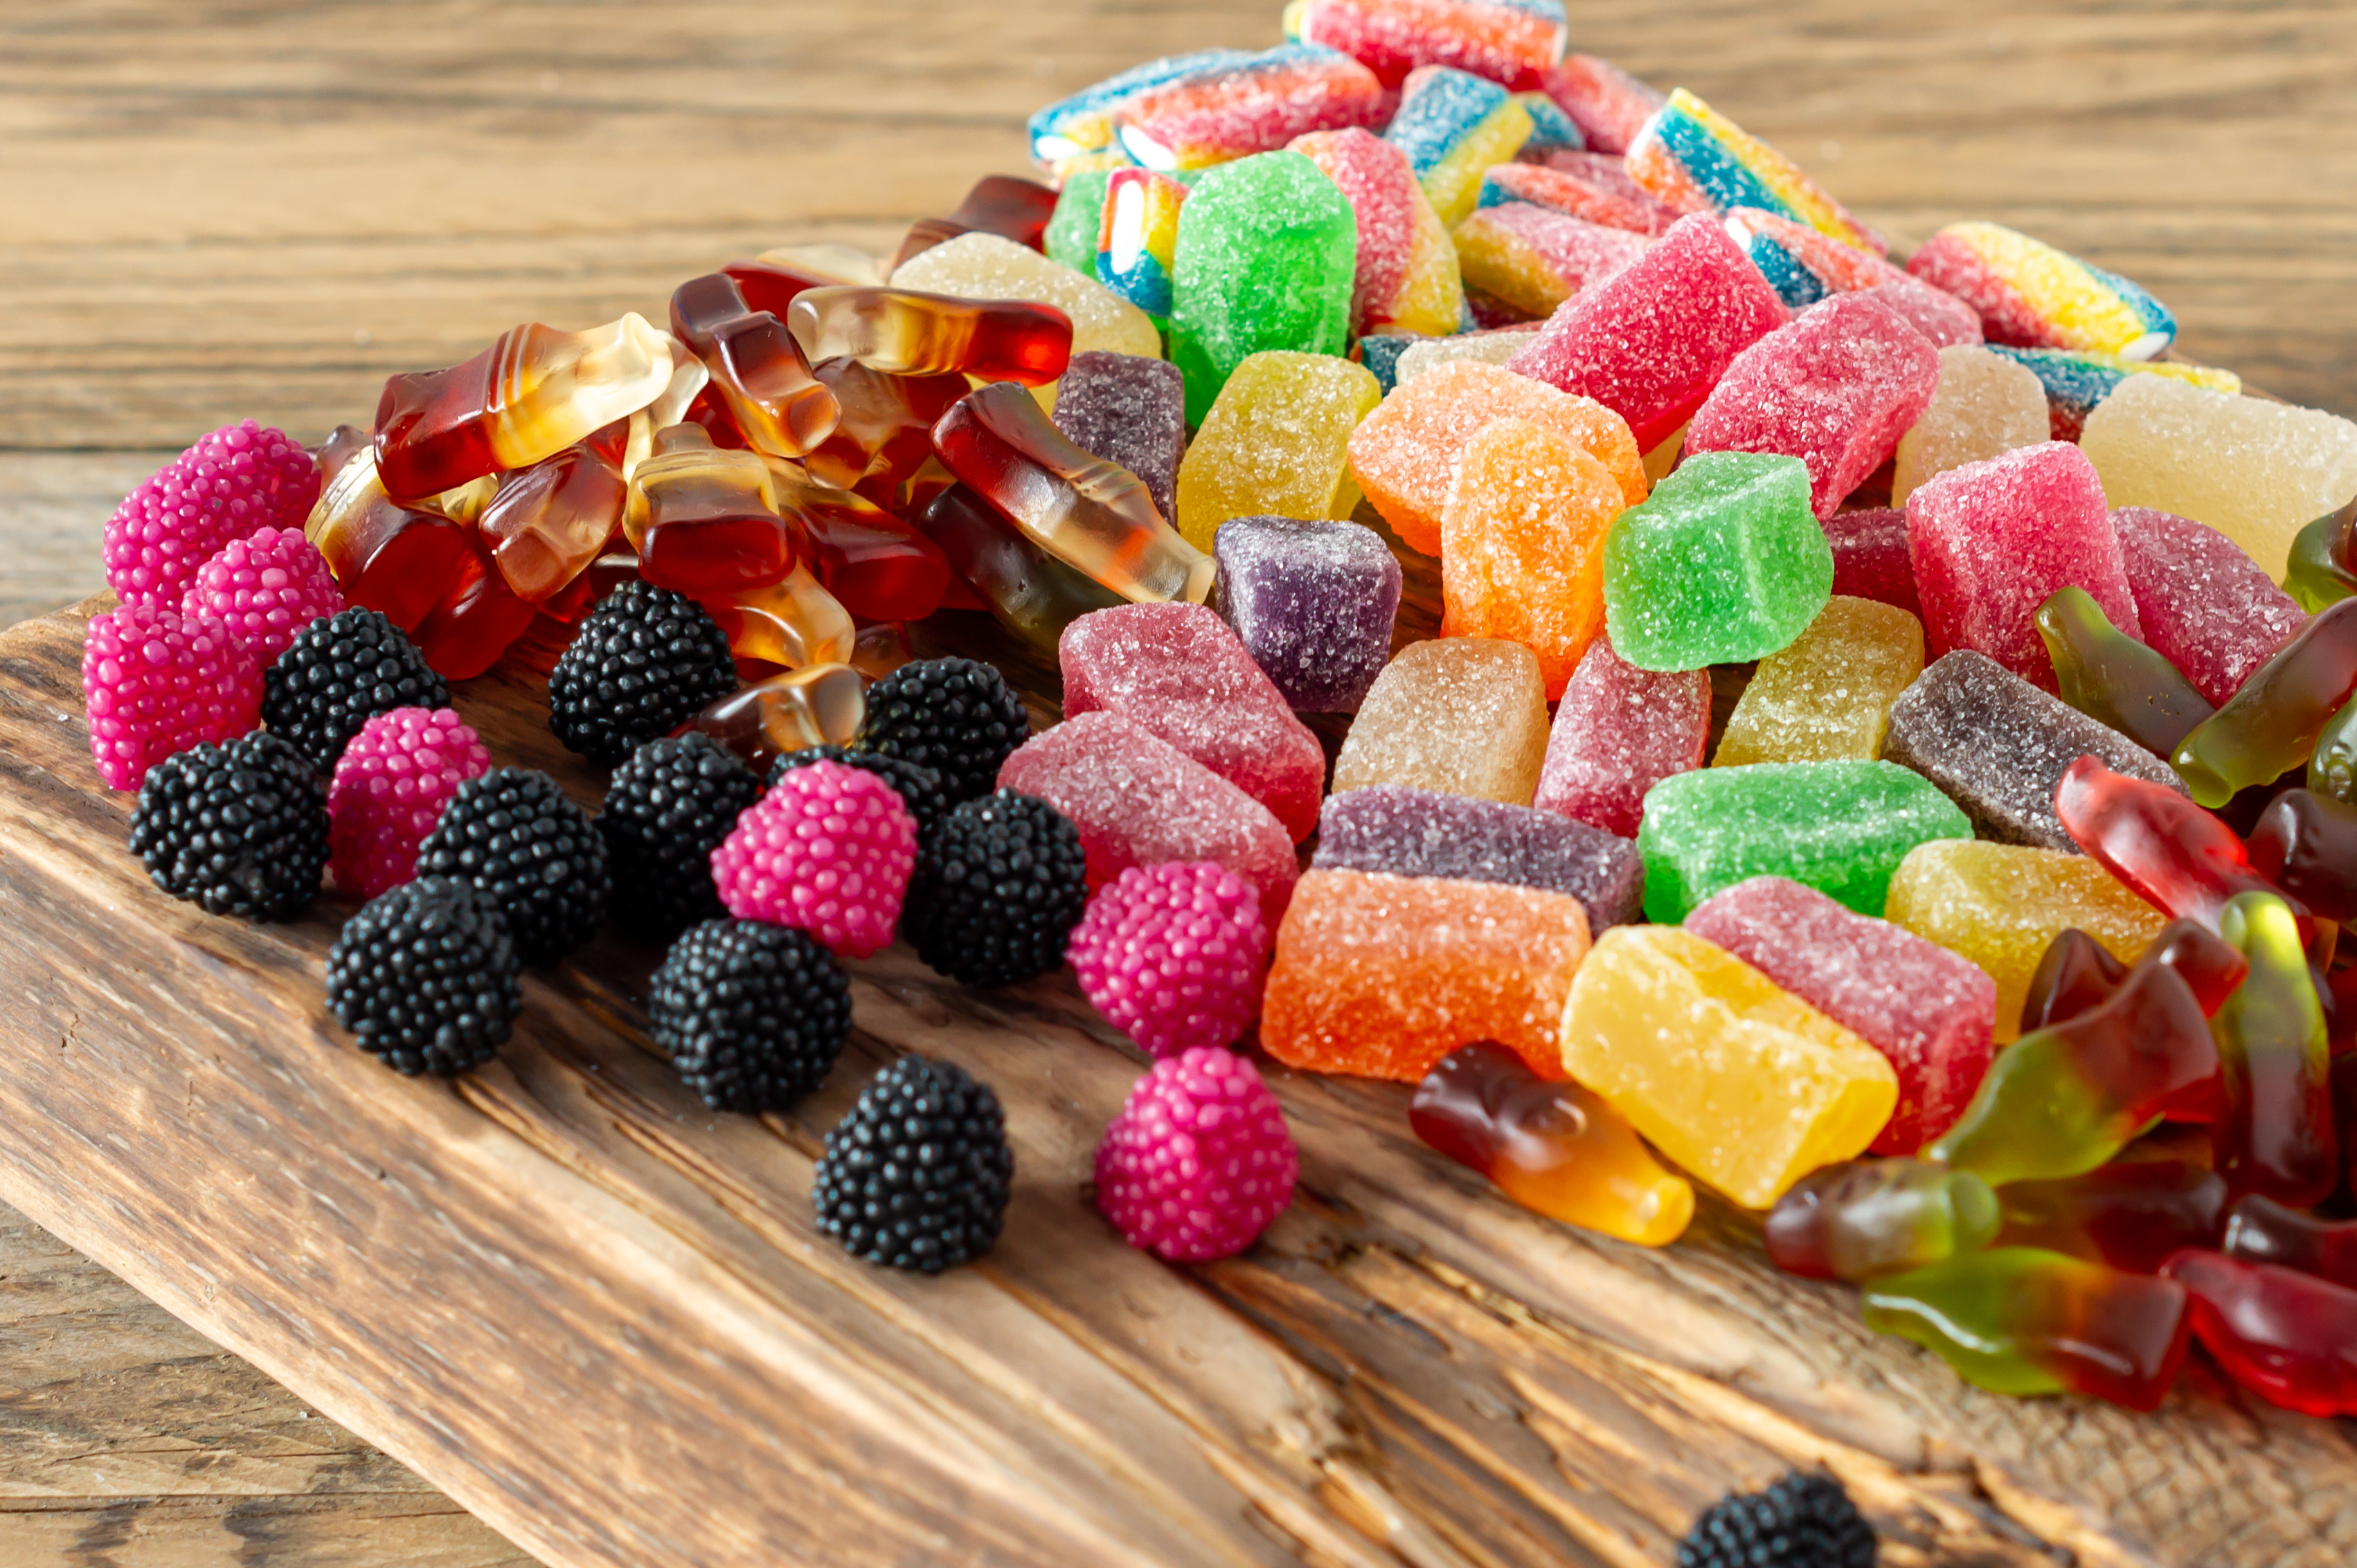 Fruit marmalade sweets, jelly candies on a wooden desk. Fruit natural dessert with sugar.